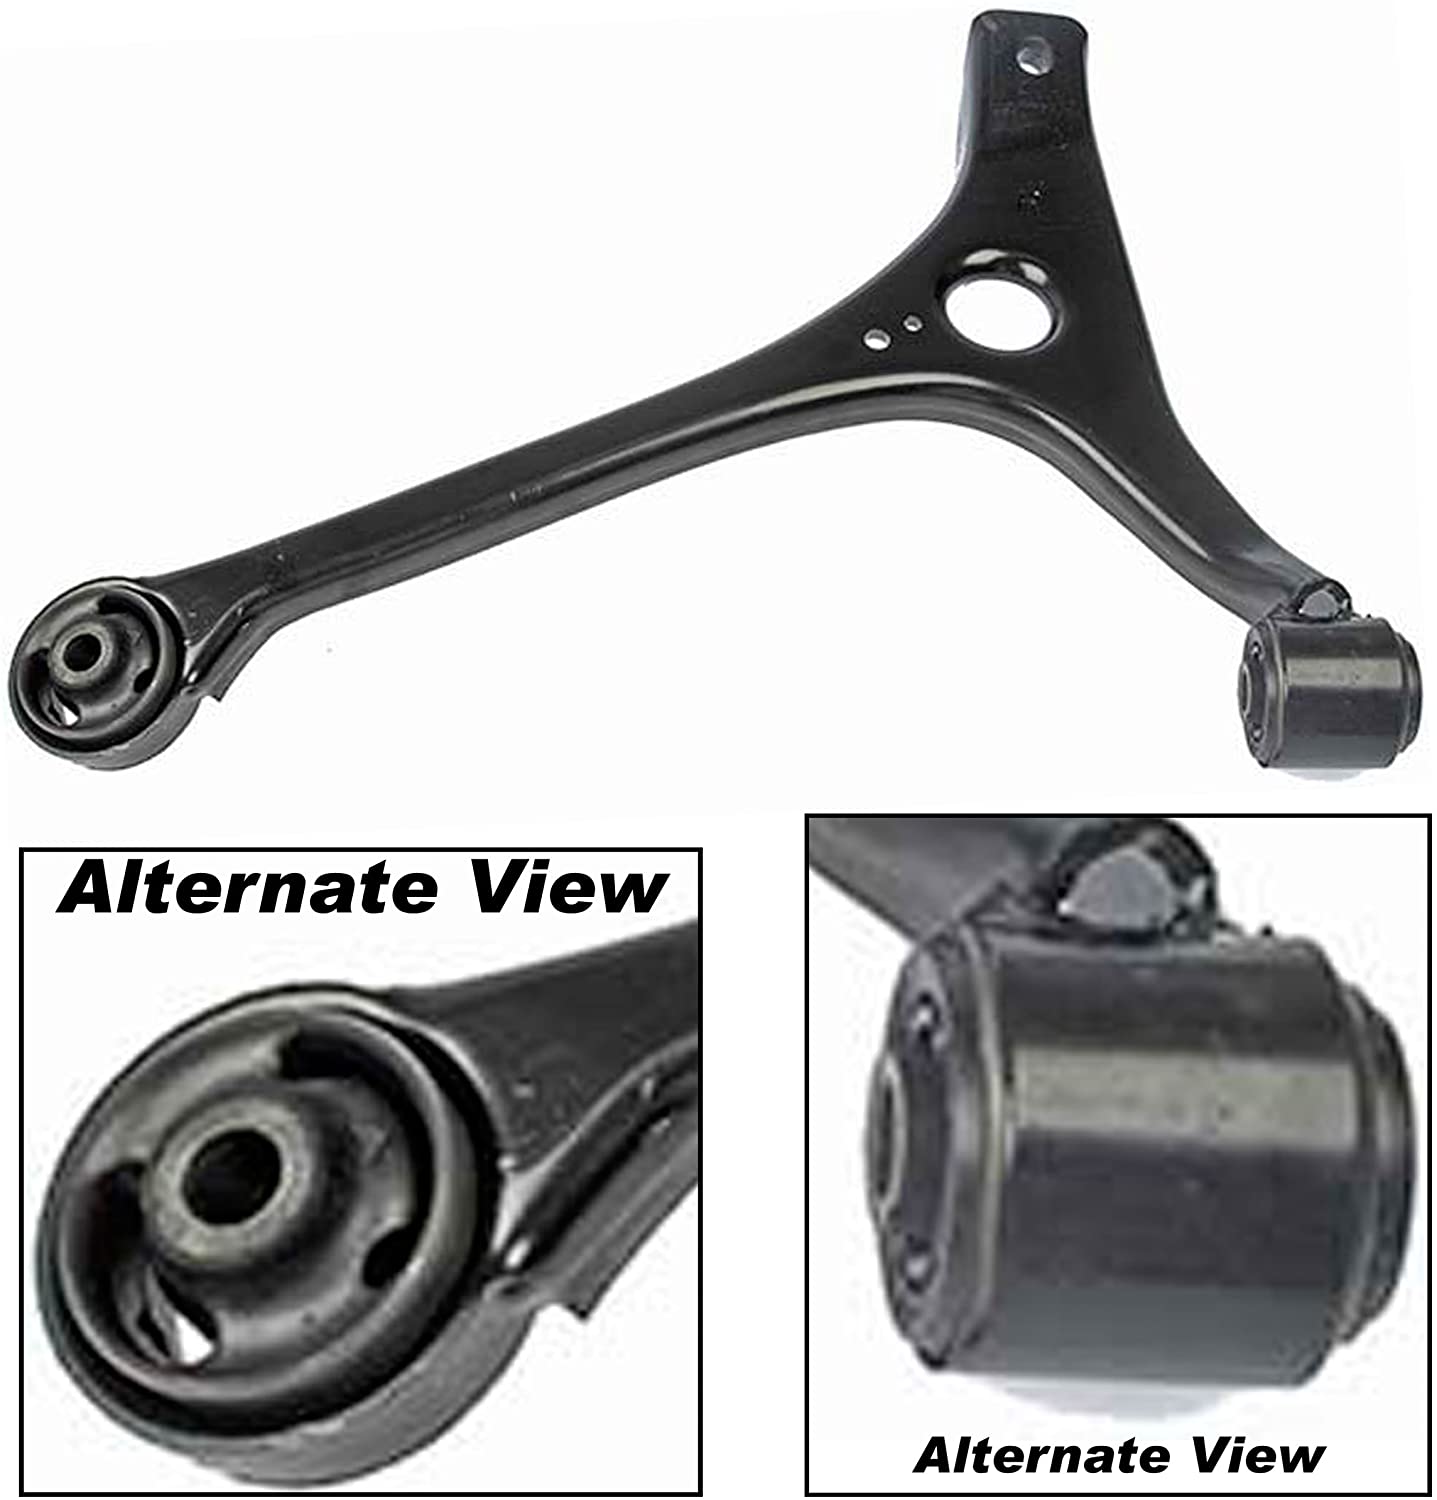 APDTY 631355 Control Arm Assembly w/Bushings Fits Front Lower Right (Passengers Side) 1998-2007 Ford Taurus 1998-2005 Mercury Sable (Replaces MCS0E57, F8DZ-3078-AB, 3F1Z-3078-AA)